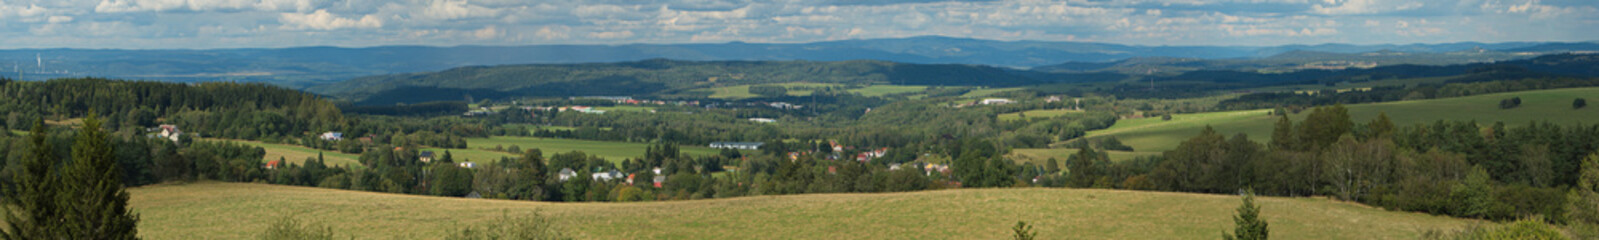 Panoramic view from the spiral lookout at Krásno,Plzeň Region,Czech Republic,Europe 